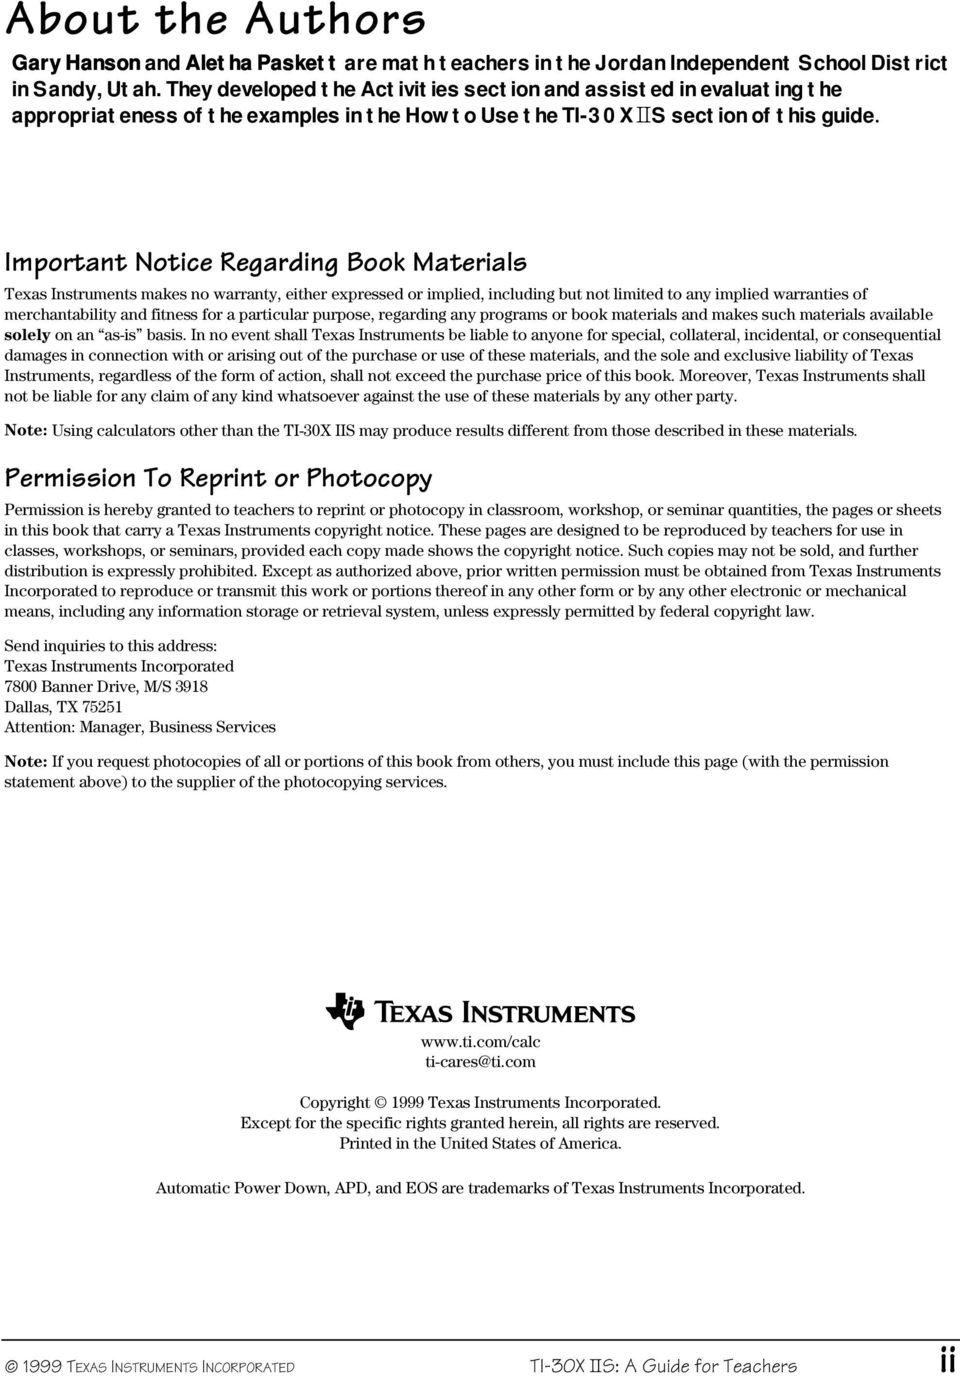 Important Notice Regarding Book Materials Texas Instruments makes no warranty, either expressed or implied, including but not limited to any implied warranties of merchantability and fitness for a